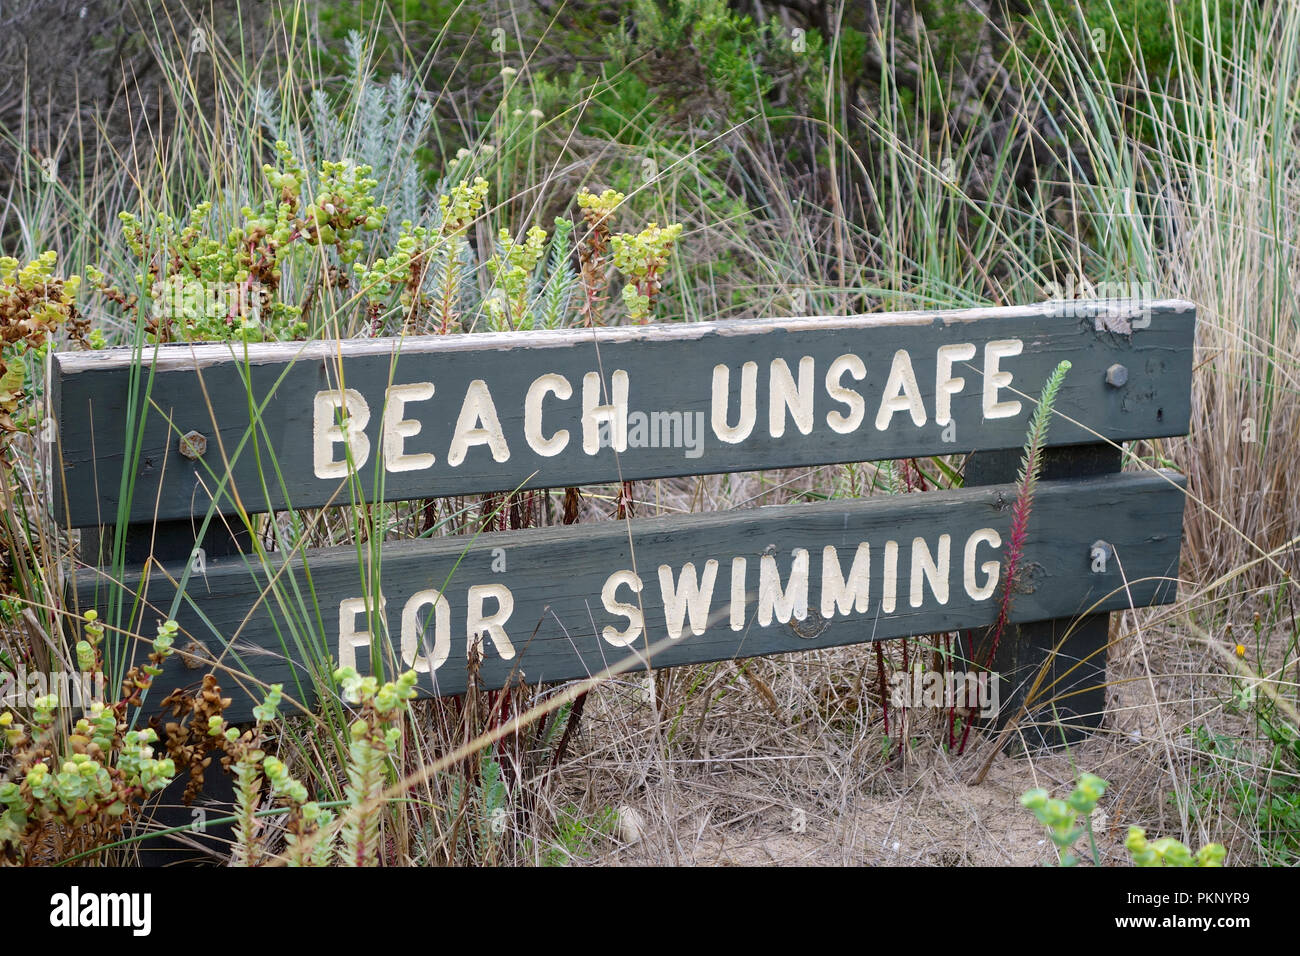 Beach Unsafe for Swimming sign. Stock Photo